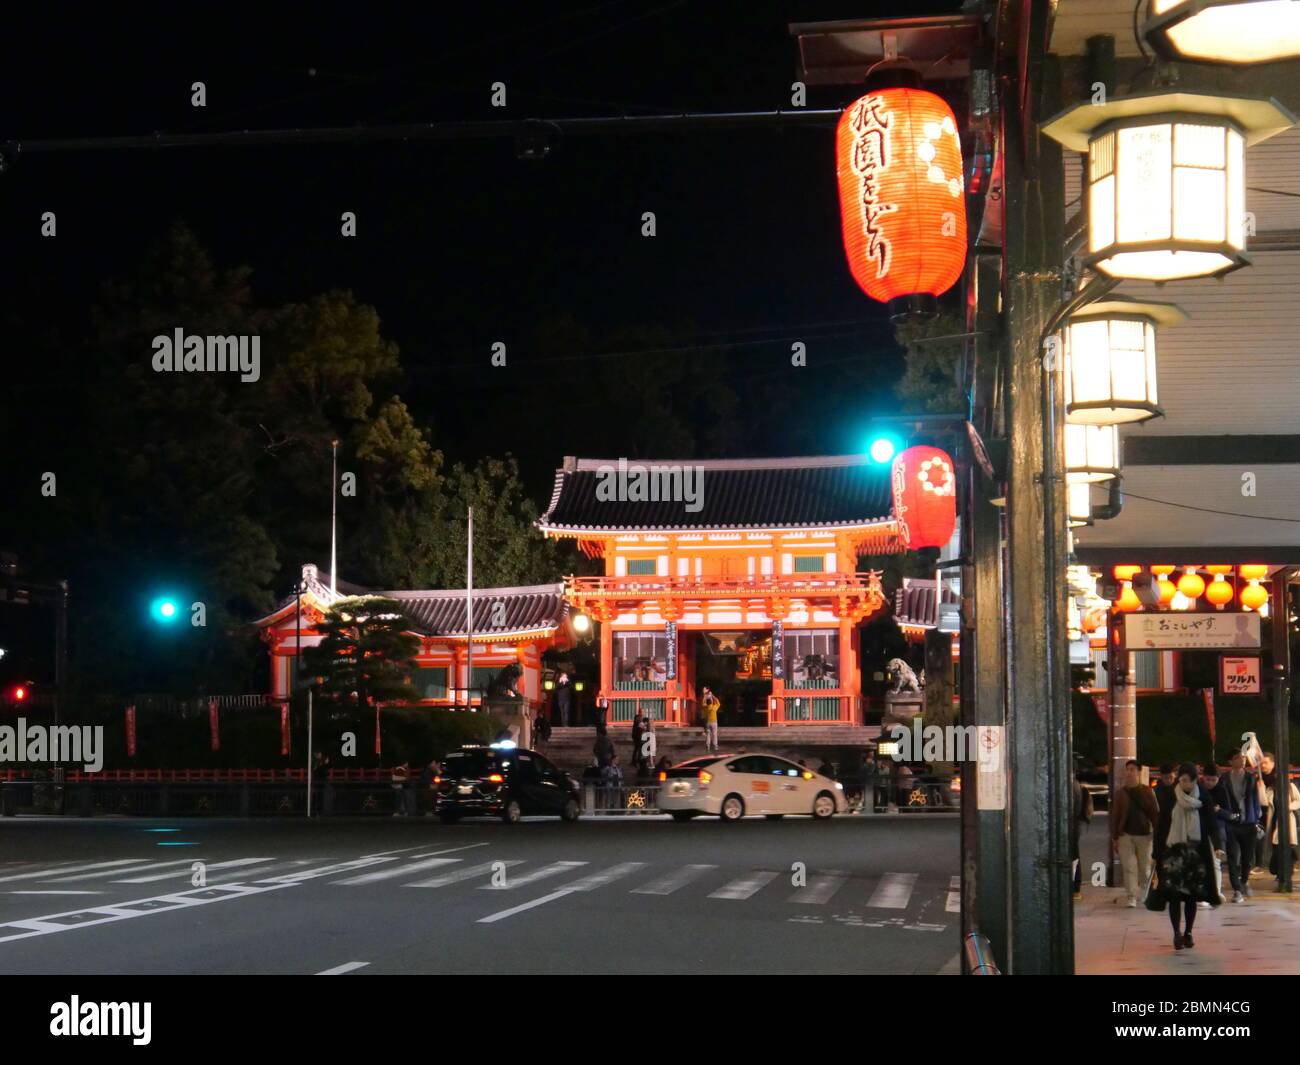 KYOTO, JAPAN - NOVEMBER 06, 2019: People walking on the street in front of the main gate of Yasaka Shrine or Gion Shrine in Kyoto at night Stock Photo